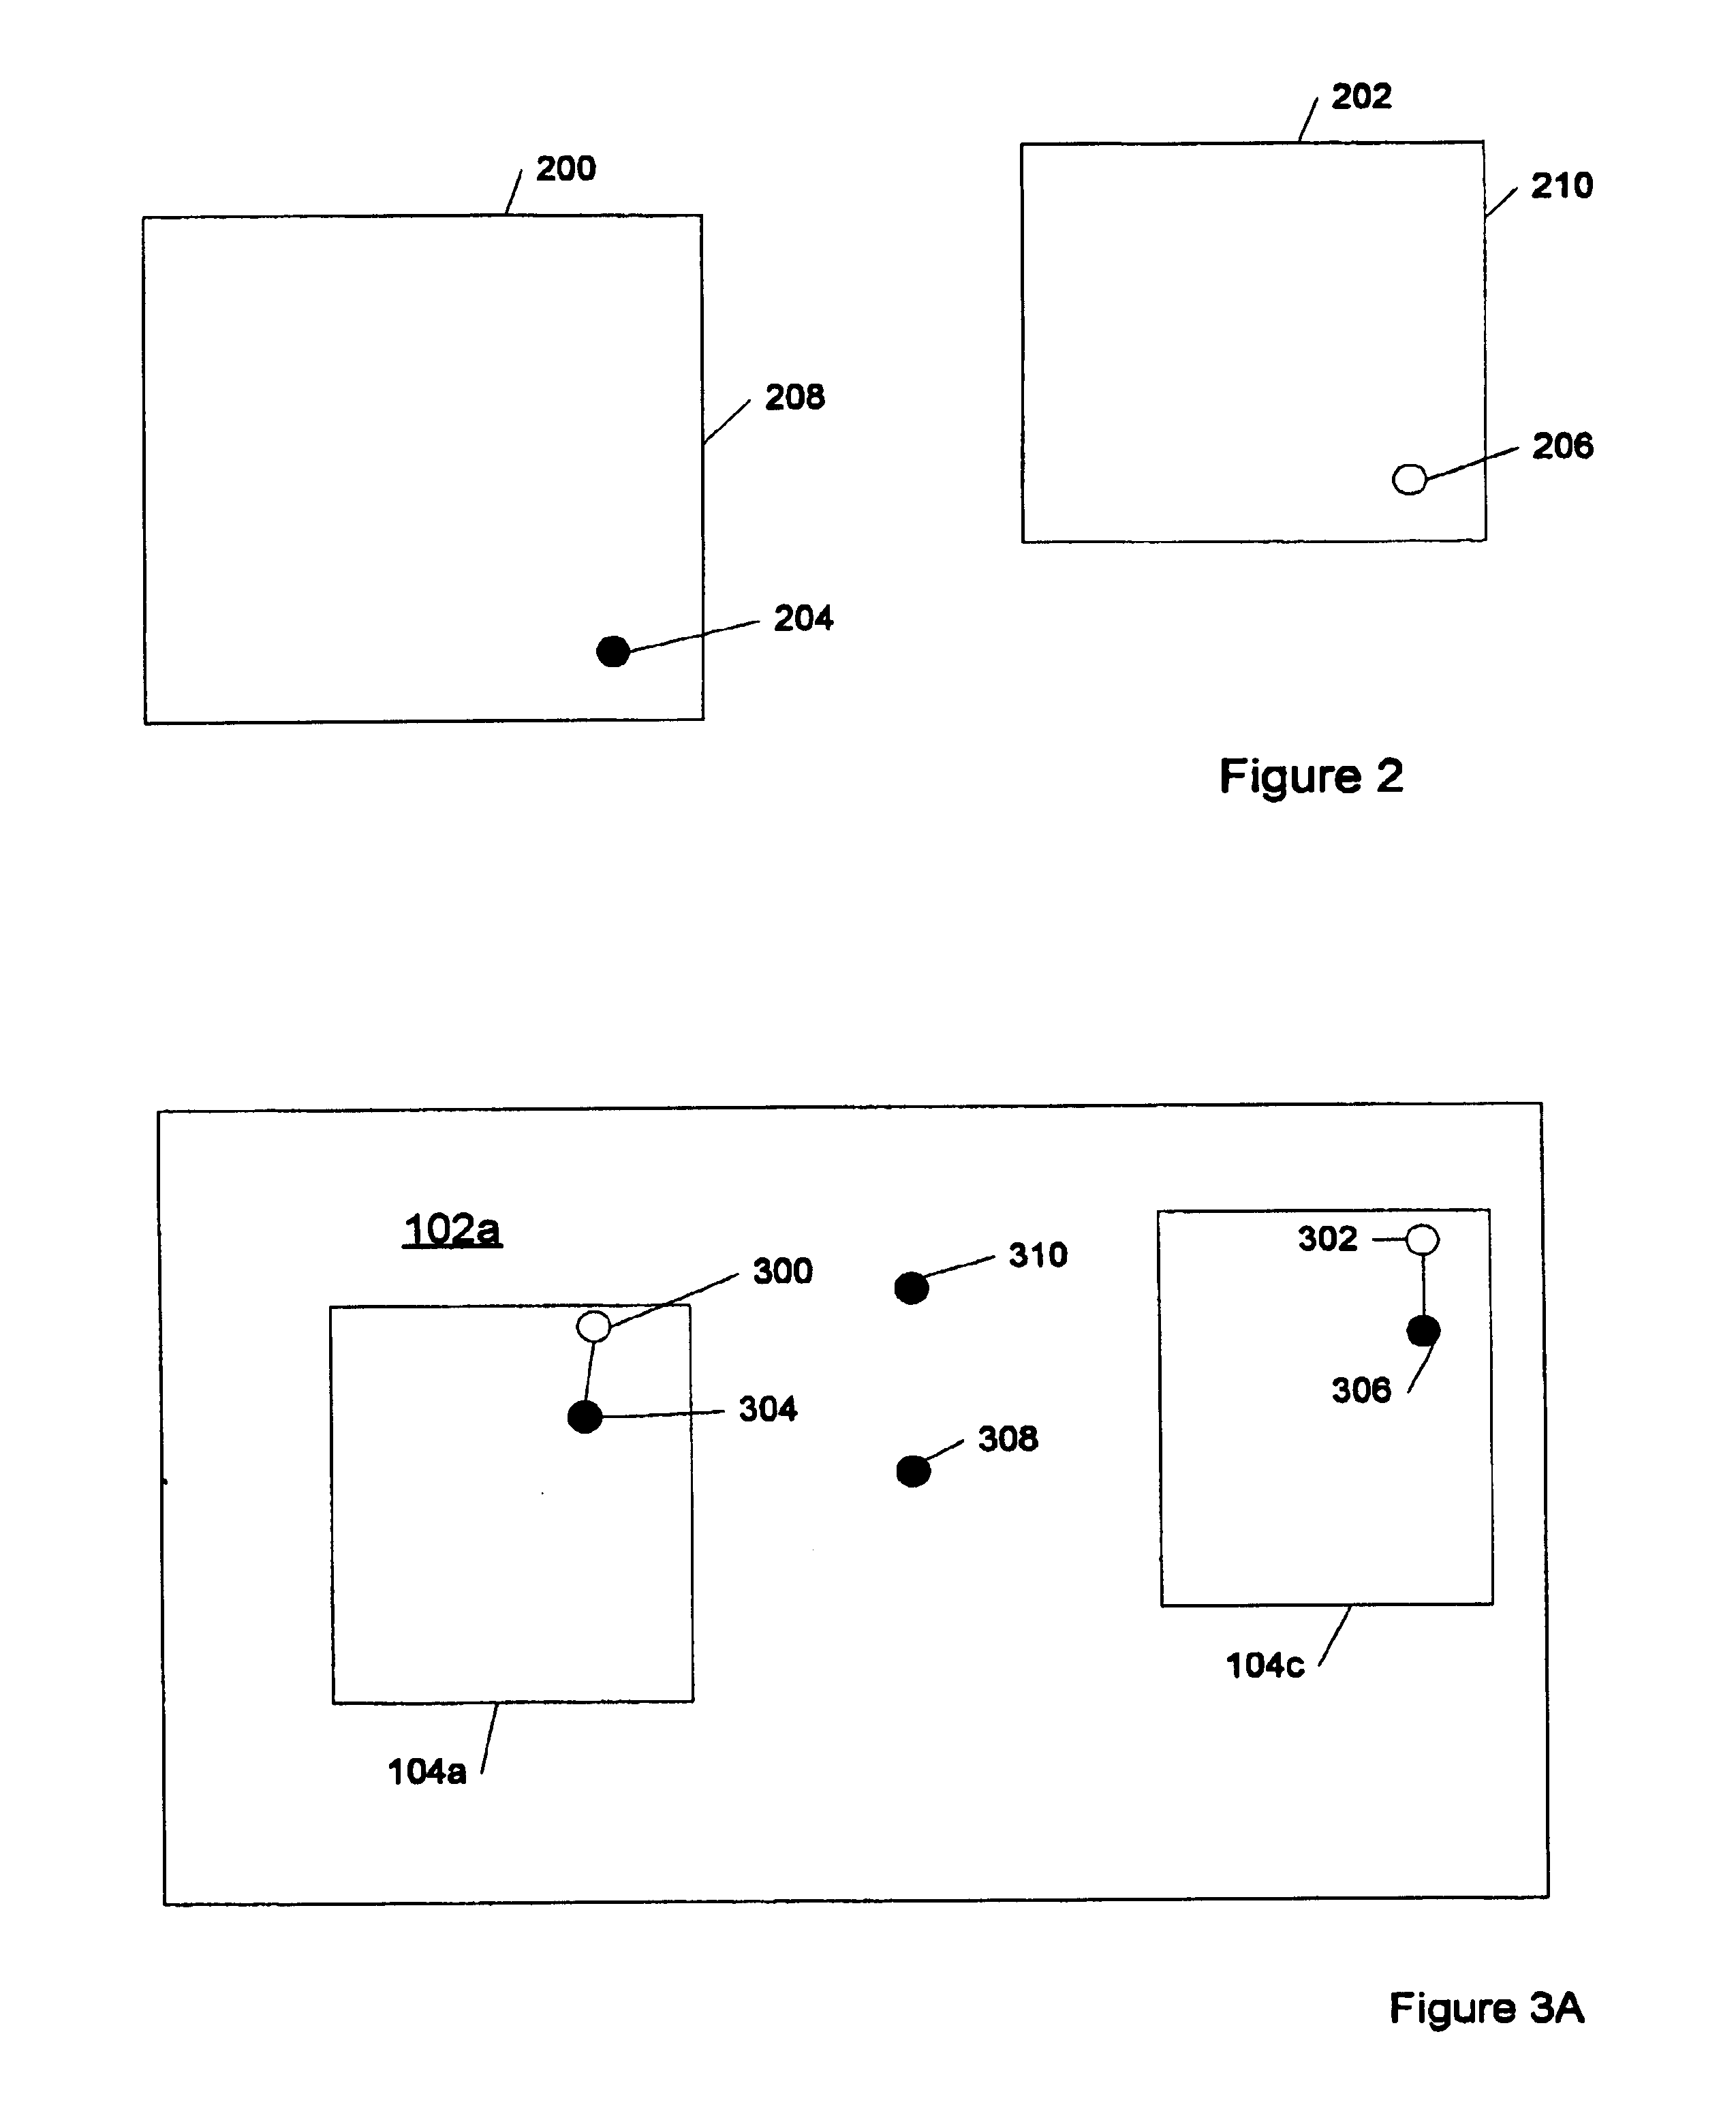 PCB component placement and trace routing therebetween